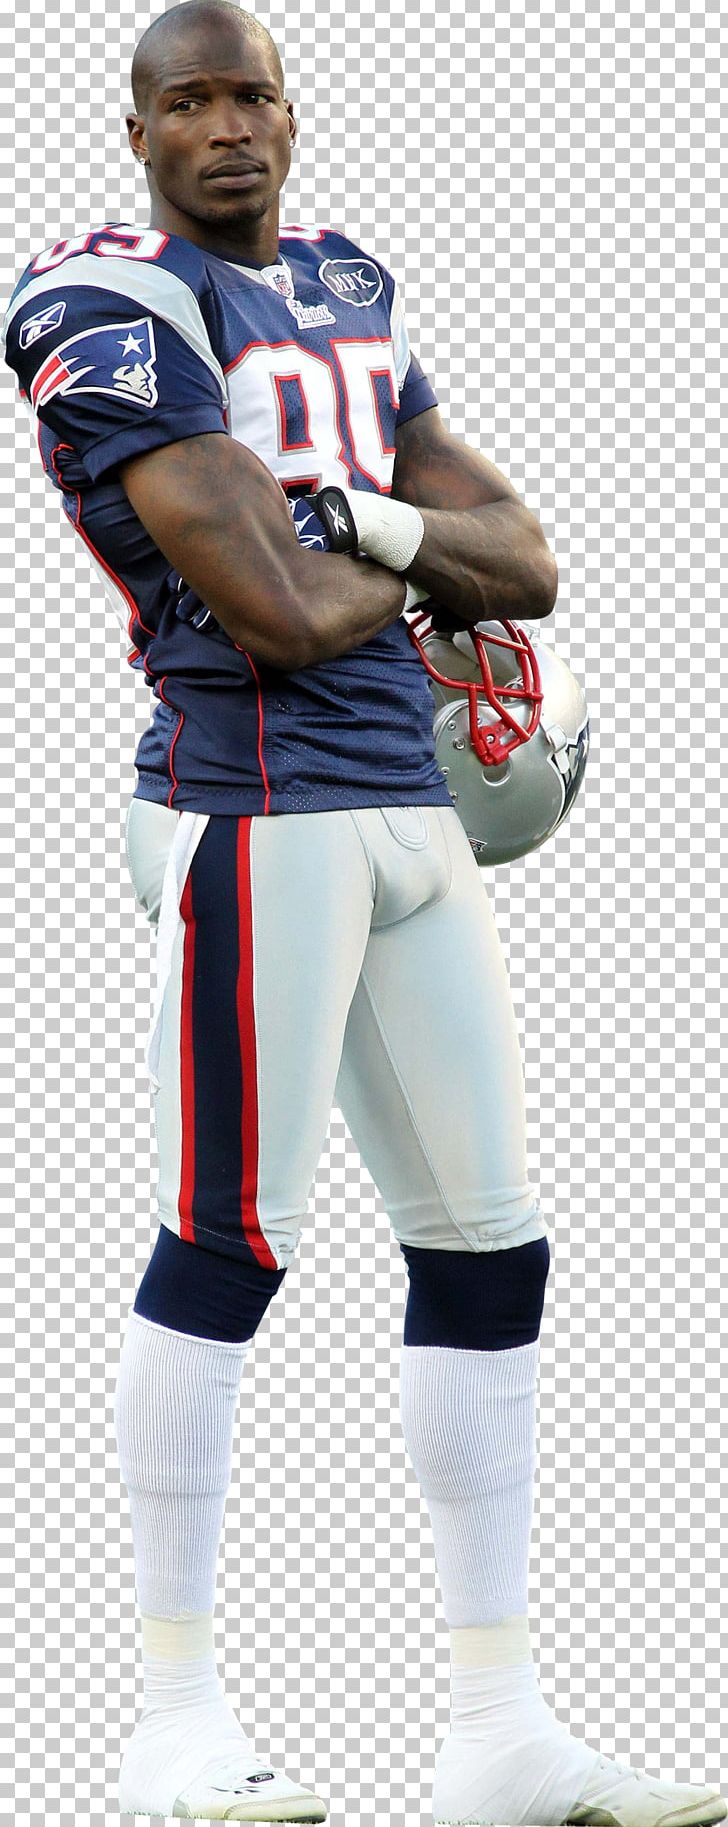 New England Patriots NFL Team Sport American Football Protective Gear PNG, Clipart, American Football, Competition Event, Football Player, Jersey, Nfl Free PNG Download